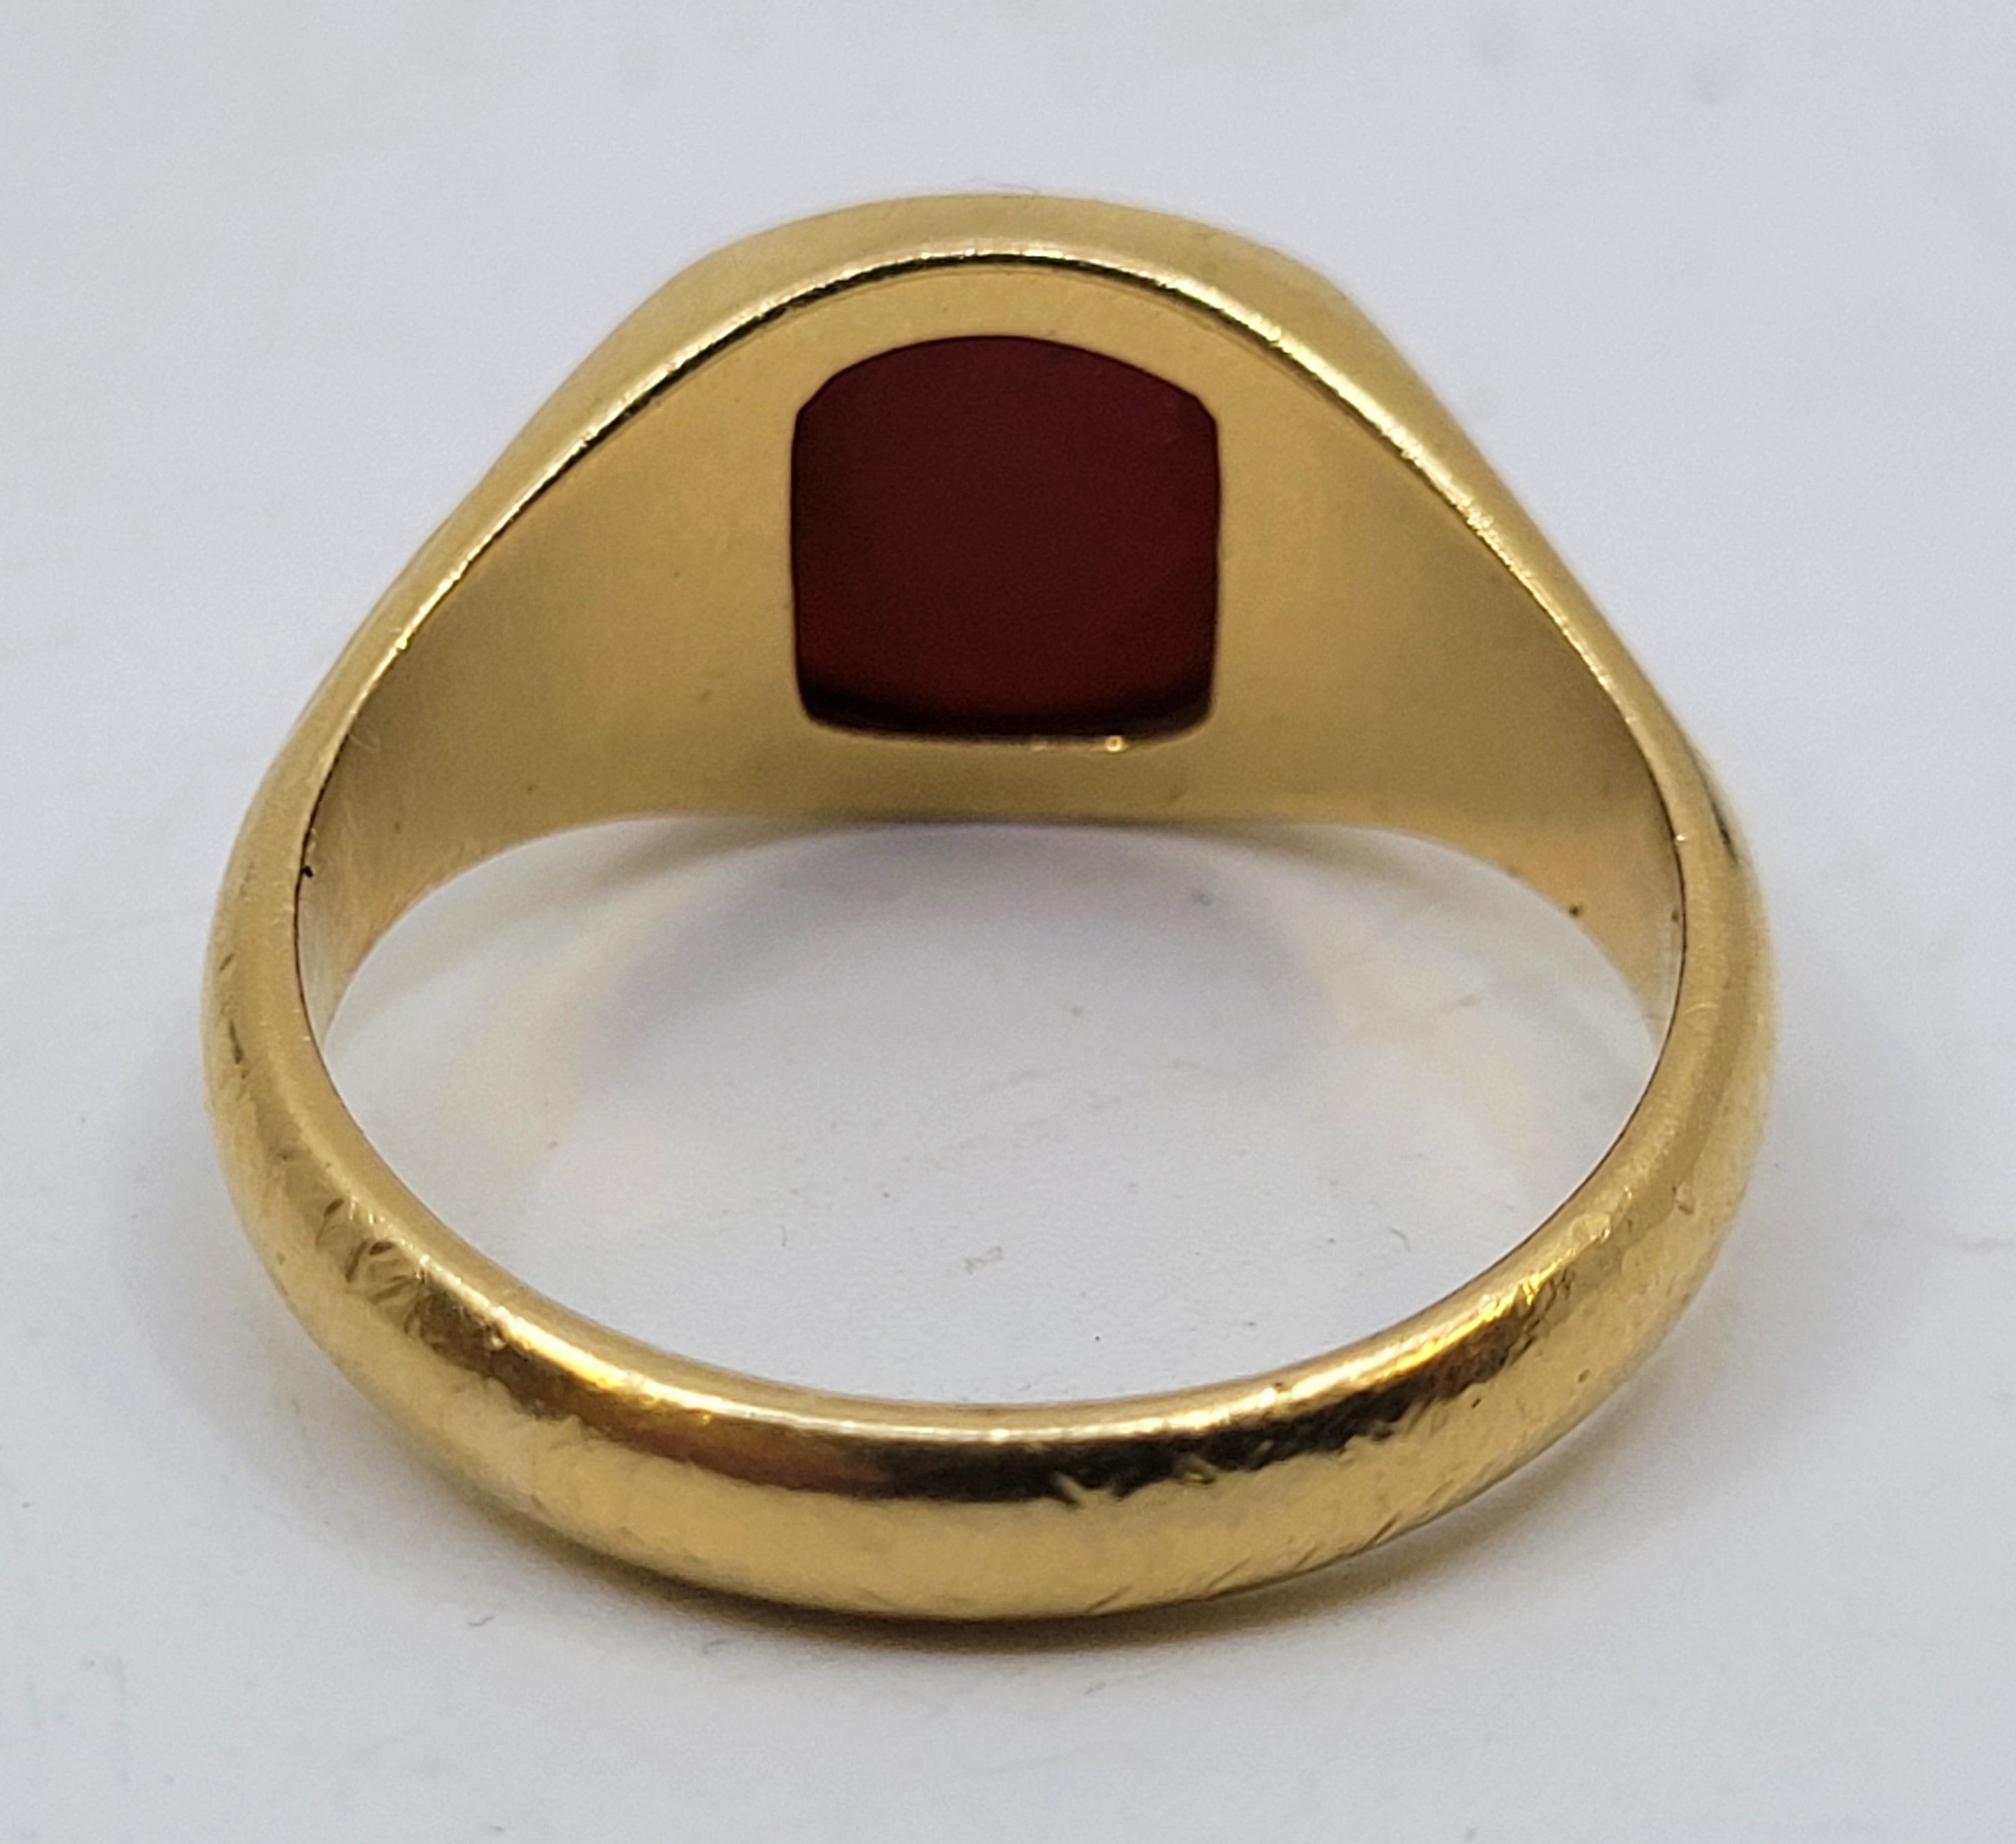 An 18ct. gold and carnelian signet ring, London 1958, size UK X 1/2. (gross weight 10.5g) - Image 6 of 9